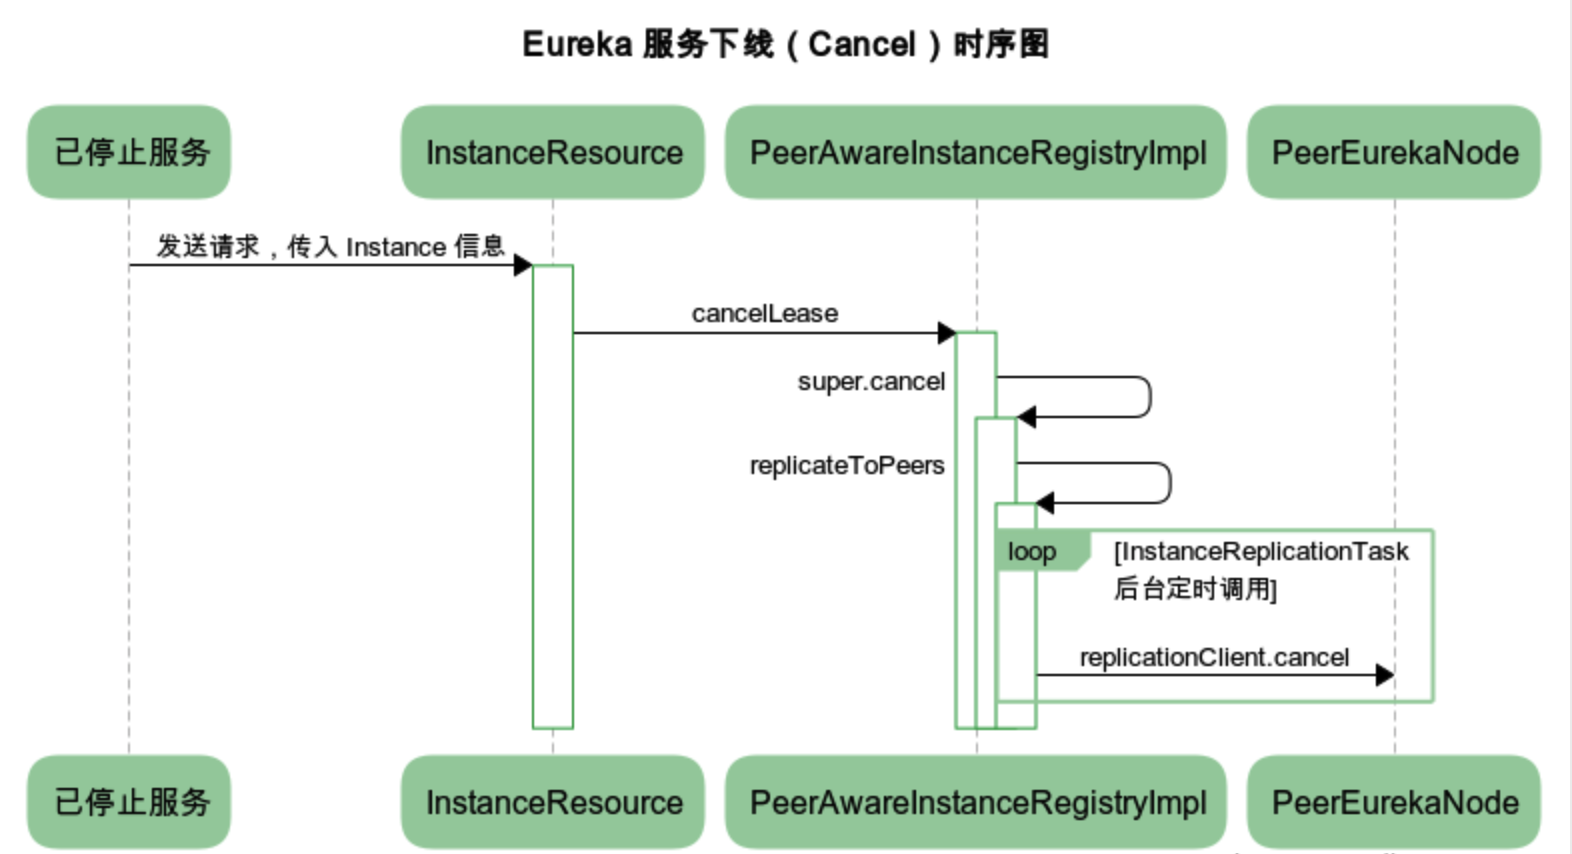 eureka-server-cancellease-sequence-chart.png